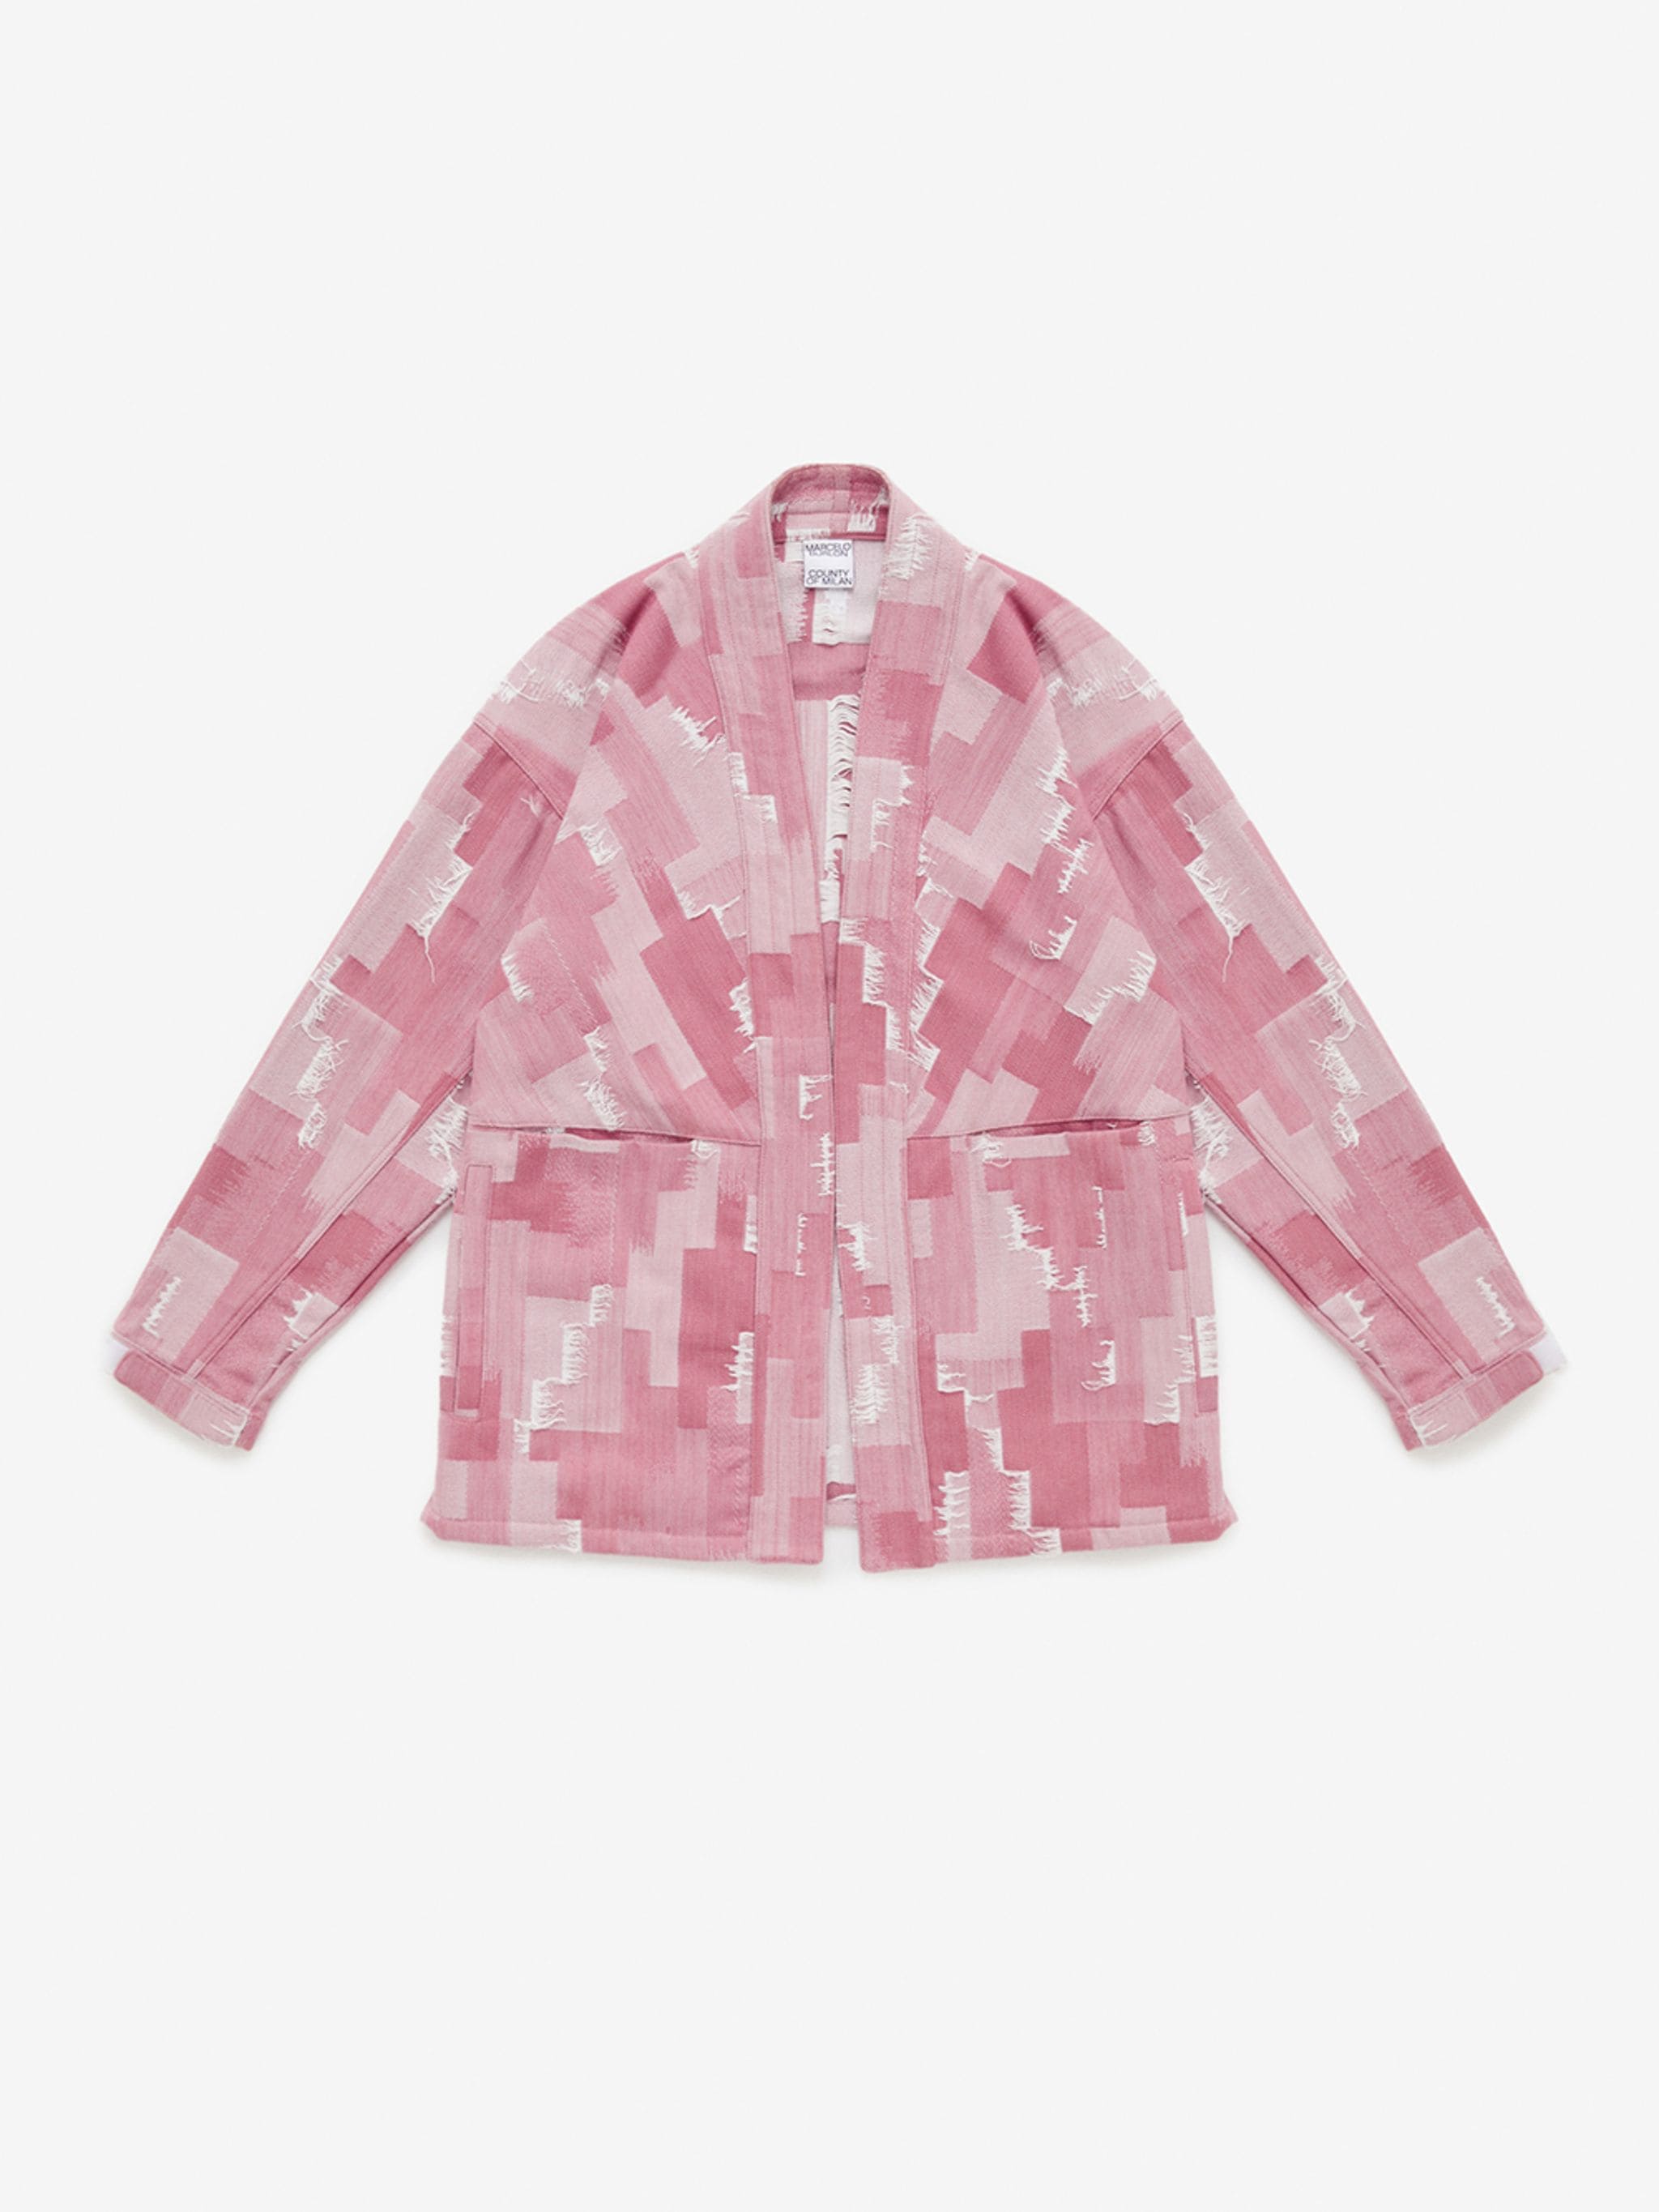 kimono-inspired denim jacket from Marcelo Burlon County of Milan featuring pink, white, denim, all-over logo print, frayed detailing, embroidered logo to the rear, two front patch pockets, long sleeves and straight hem.